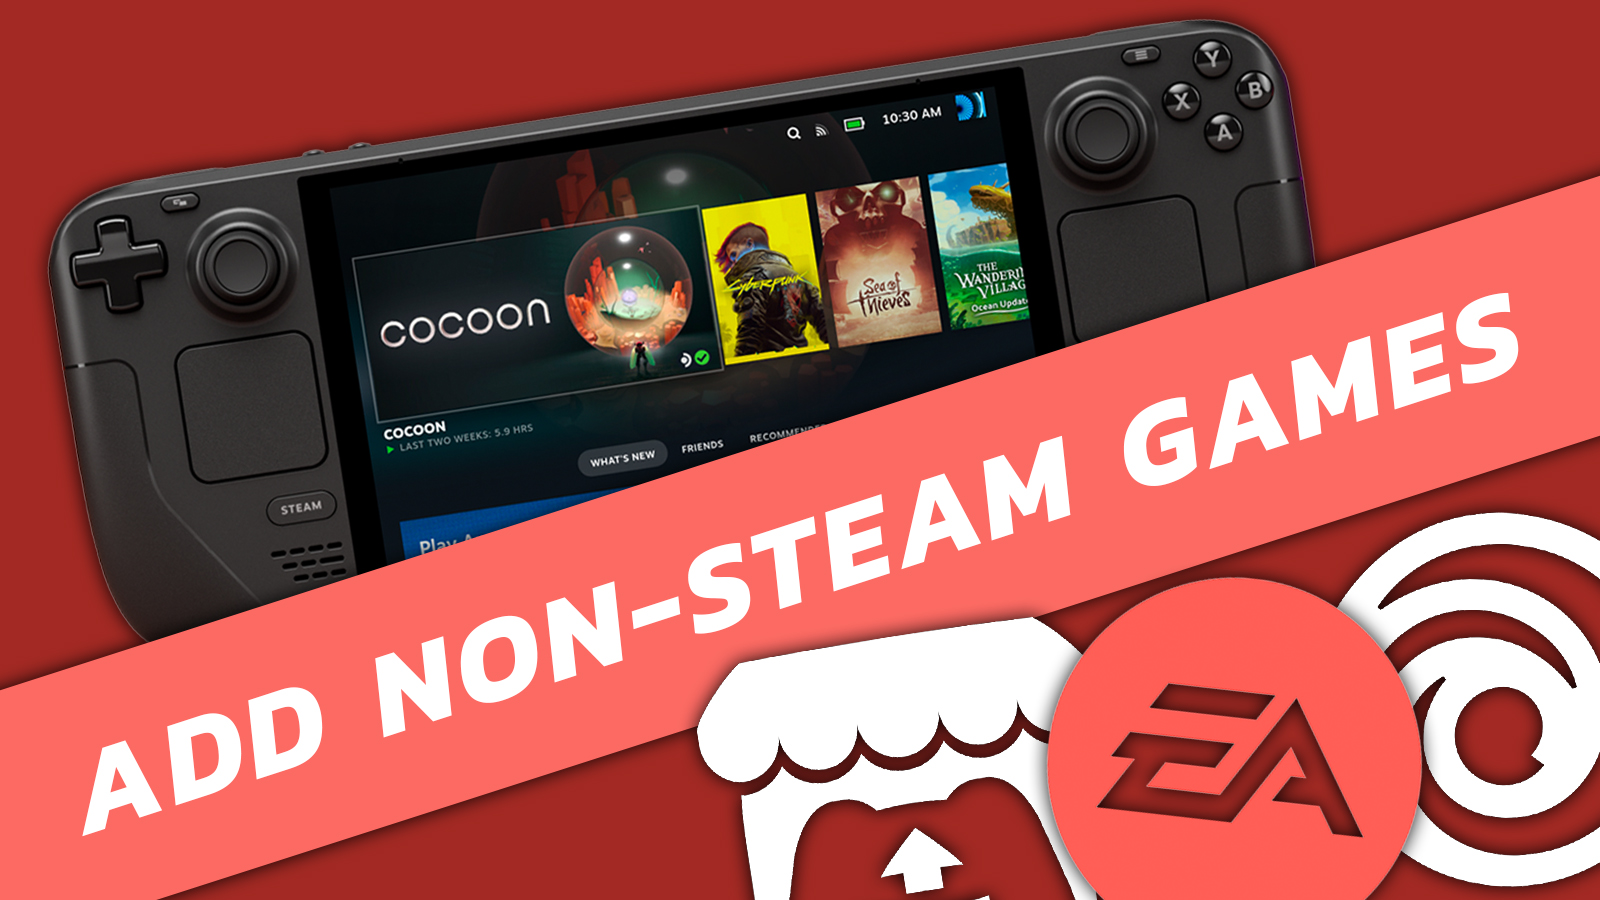 Steam is turning into the App Store and that's OK